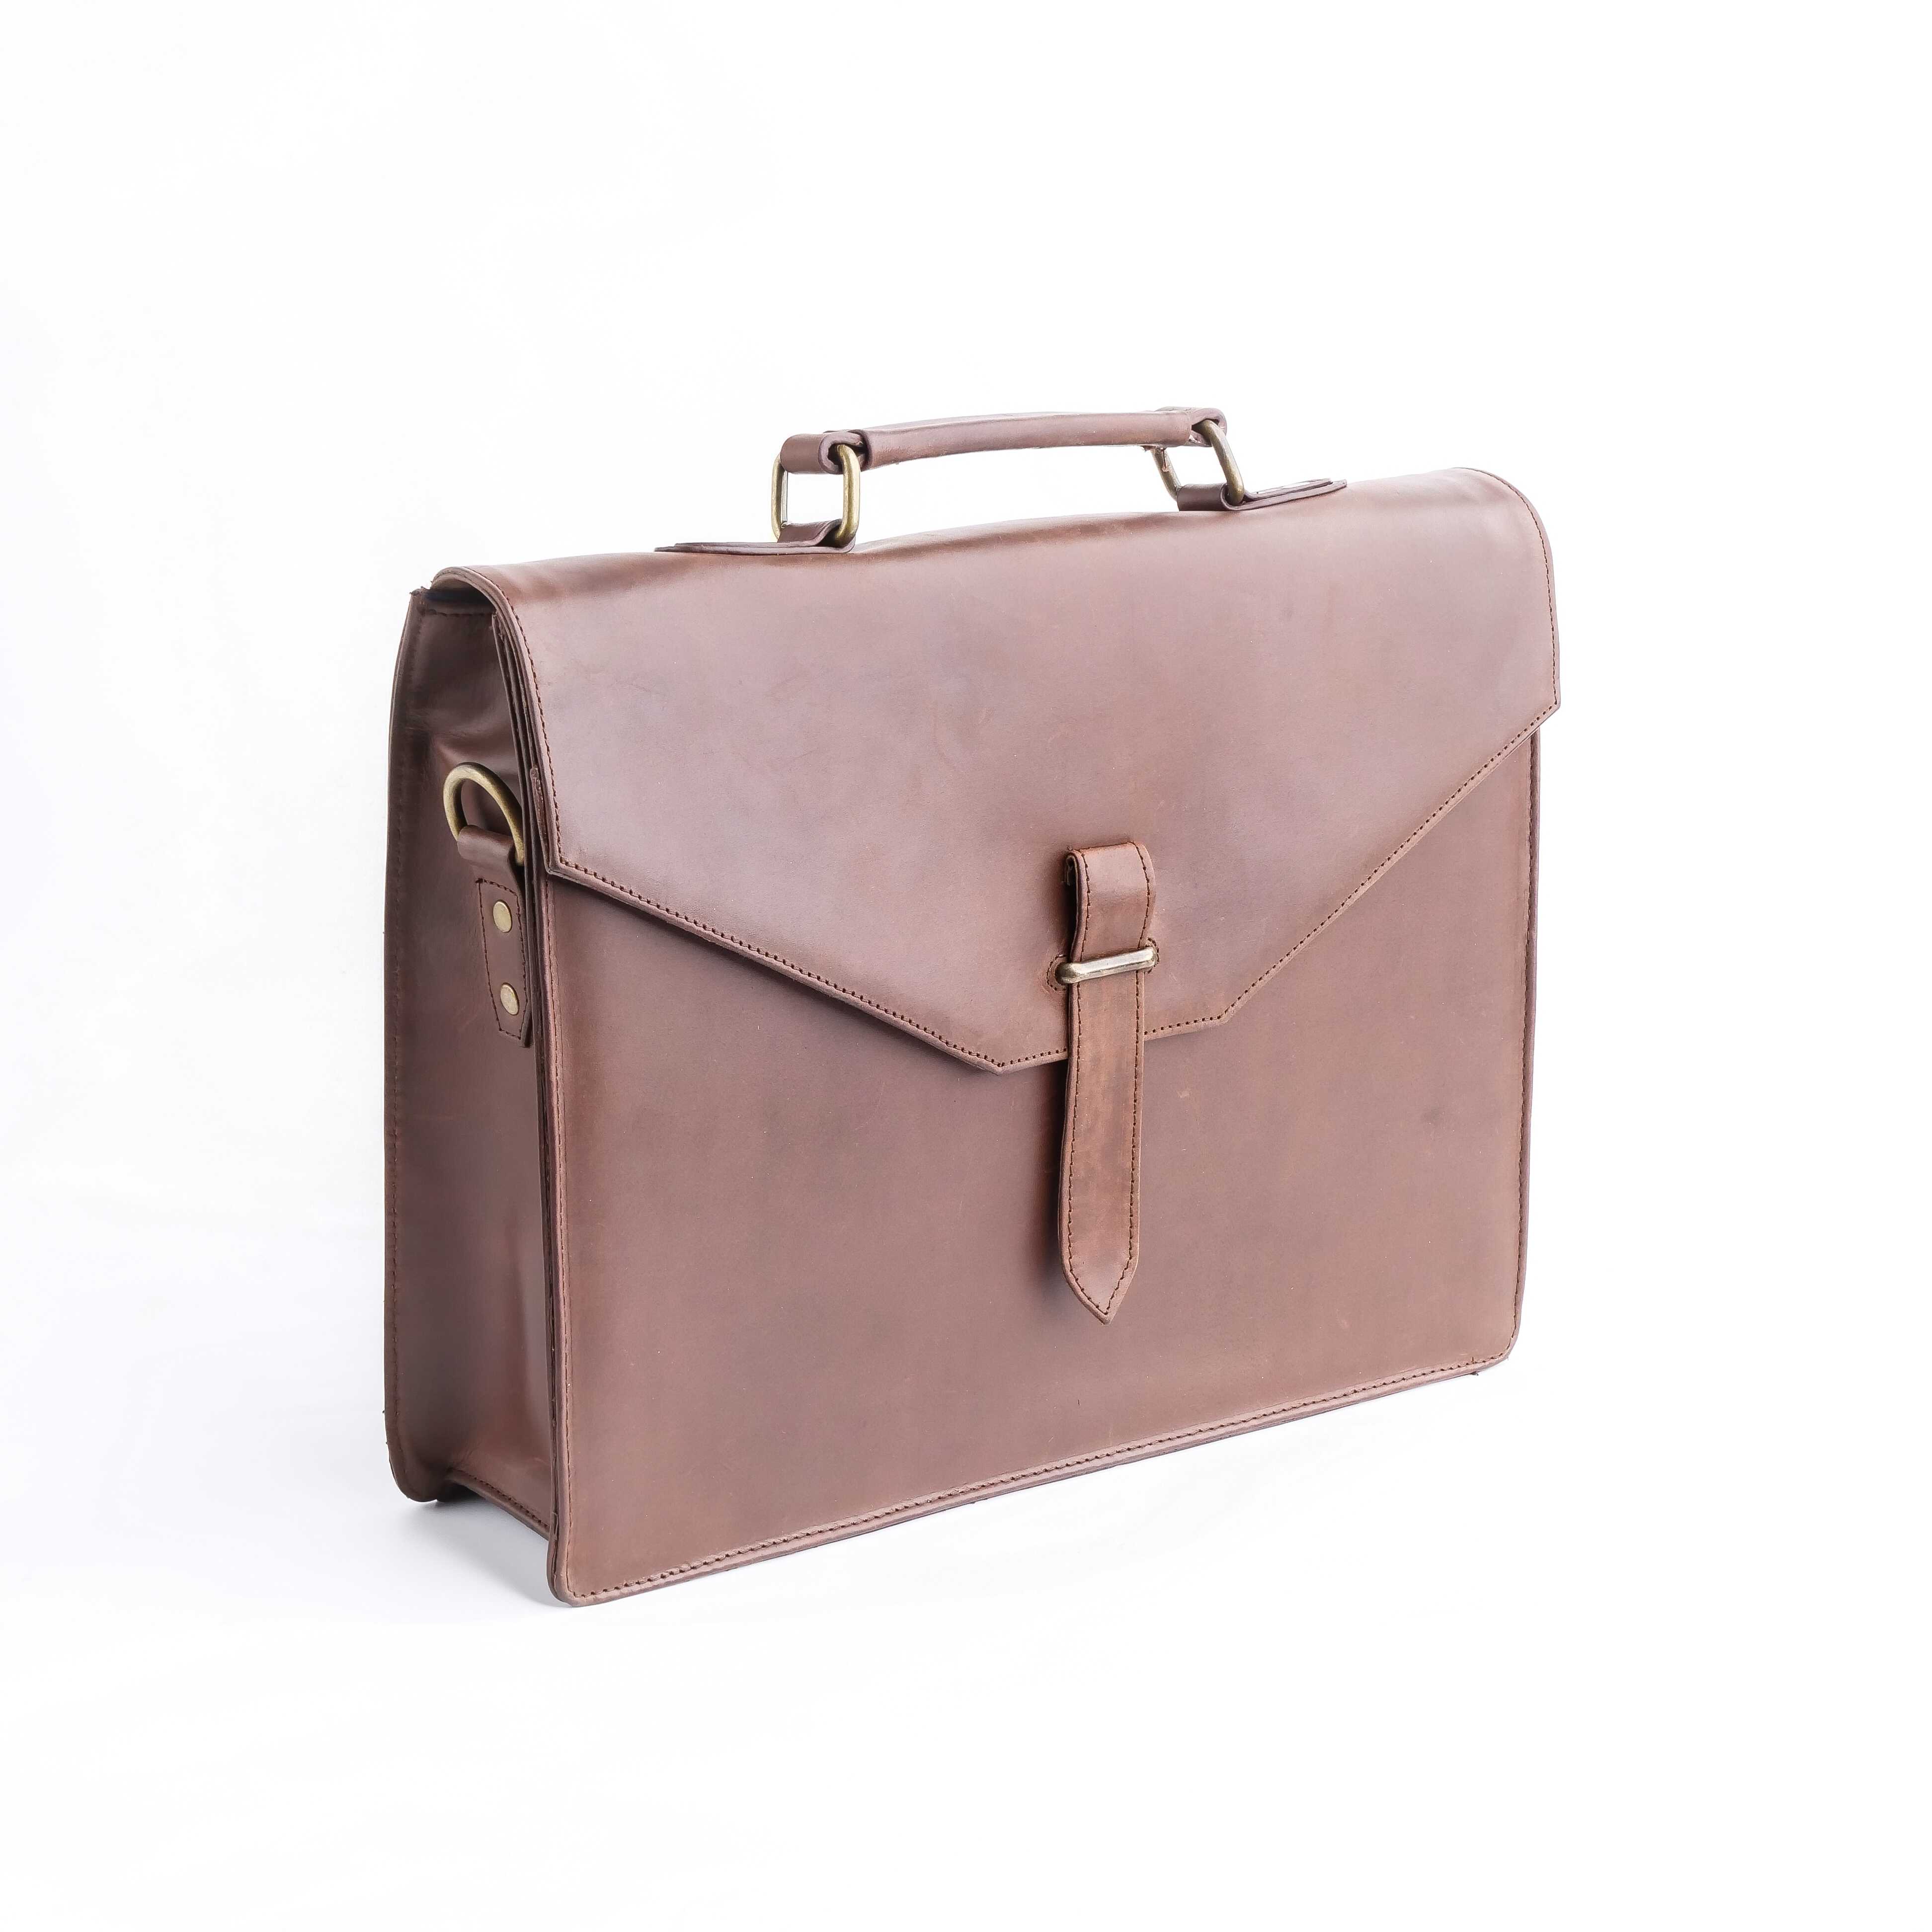 The Corporate Pure Tan Brown Leather Bag